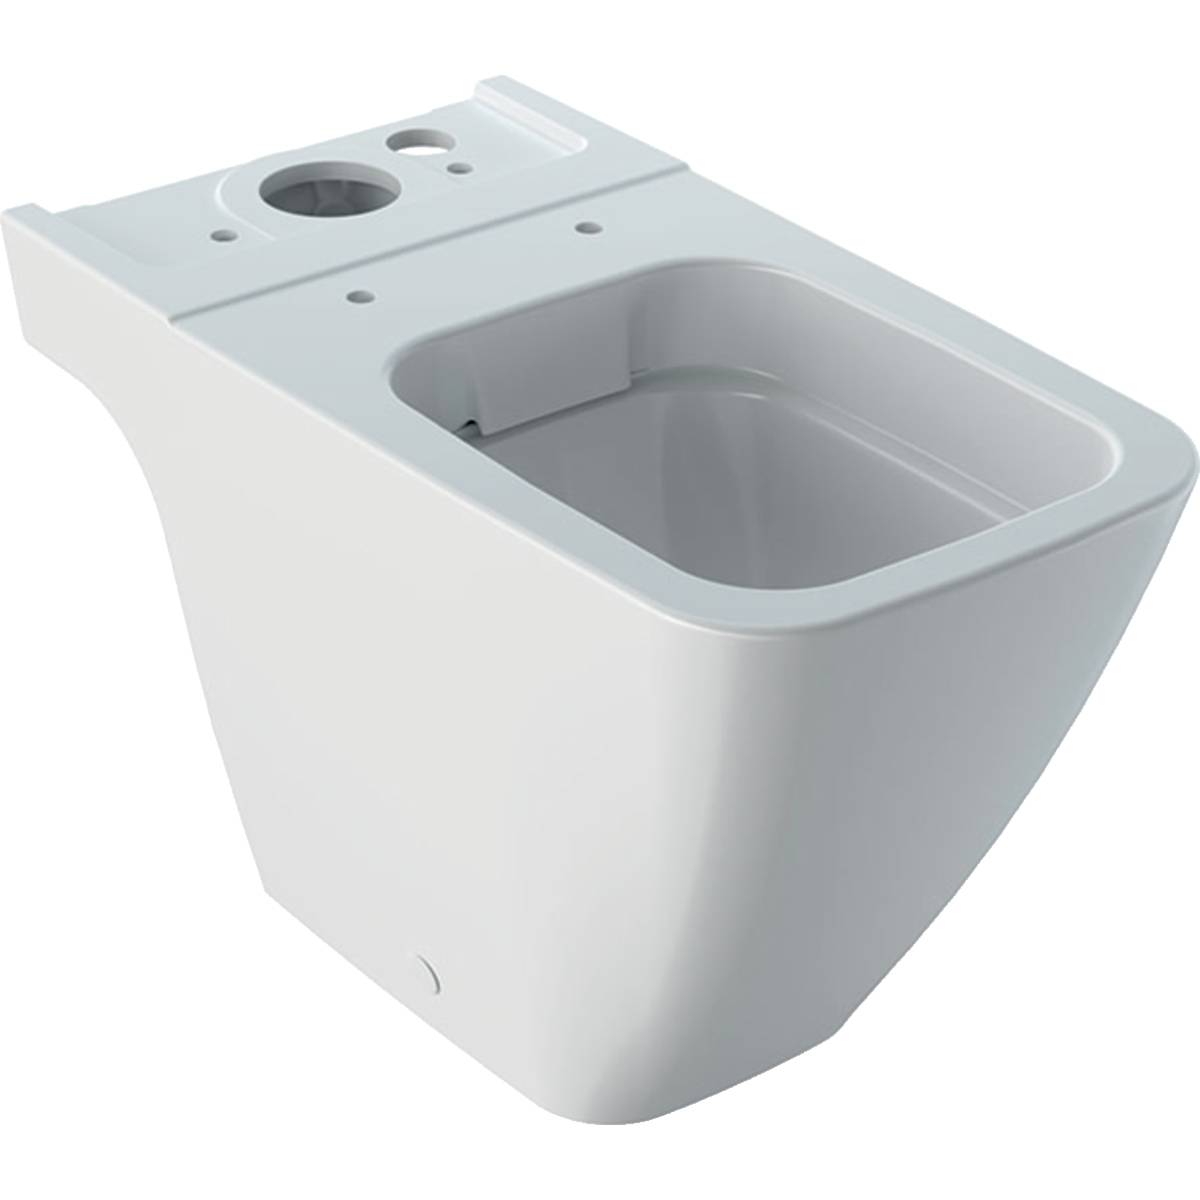 iCon Square Floor-Standing WC For Close-Coupled Exposed Cistern, Washdown, Shrouded, Rimfree